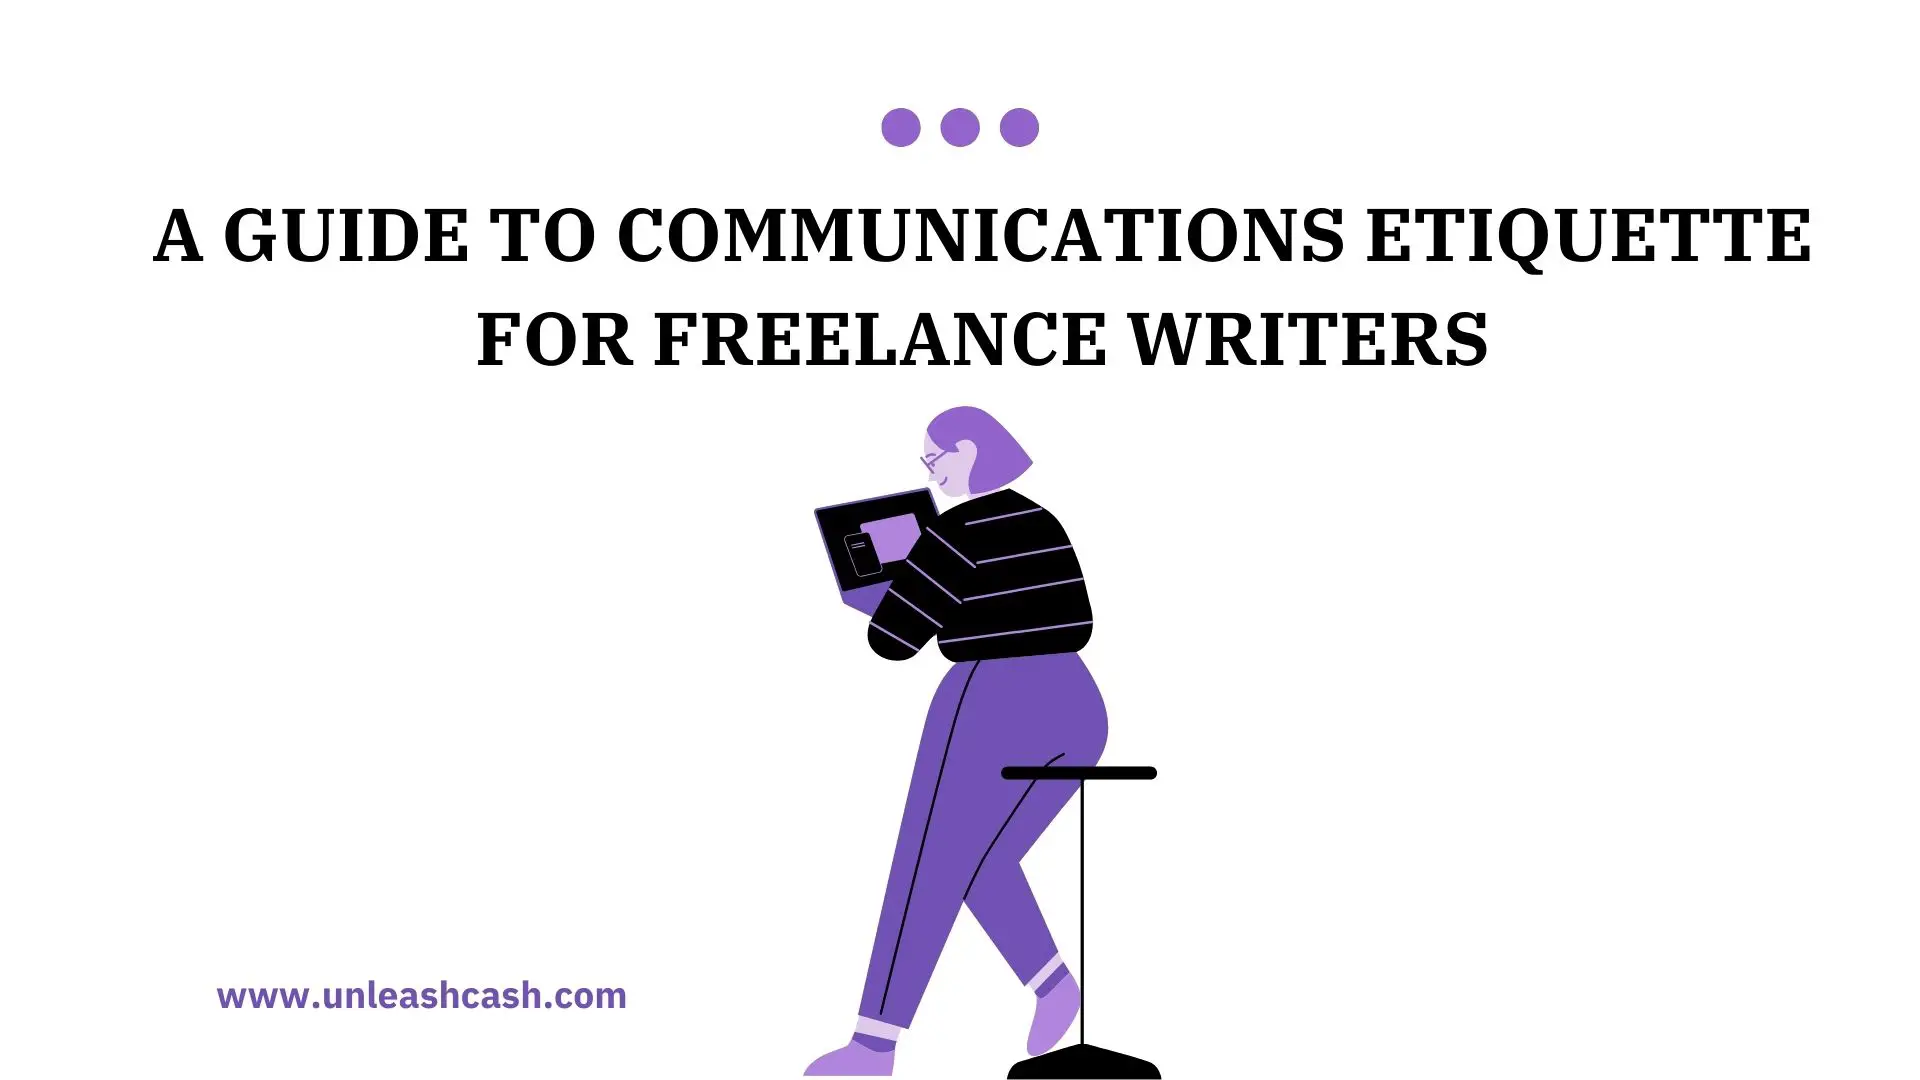 A Guide To Communications Etiquette For Freelance Writers